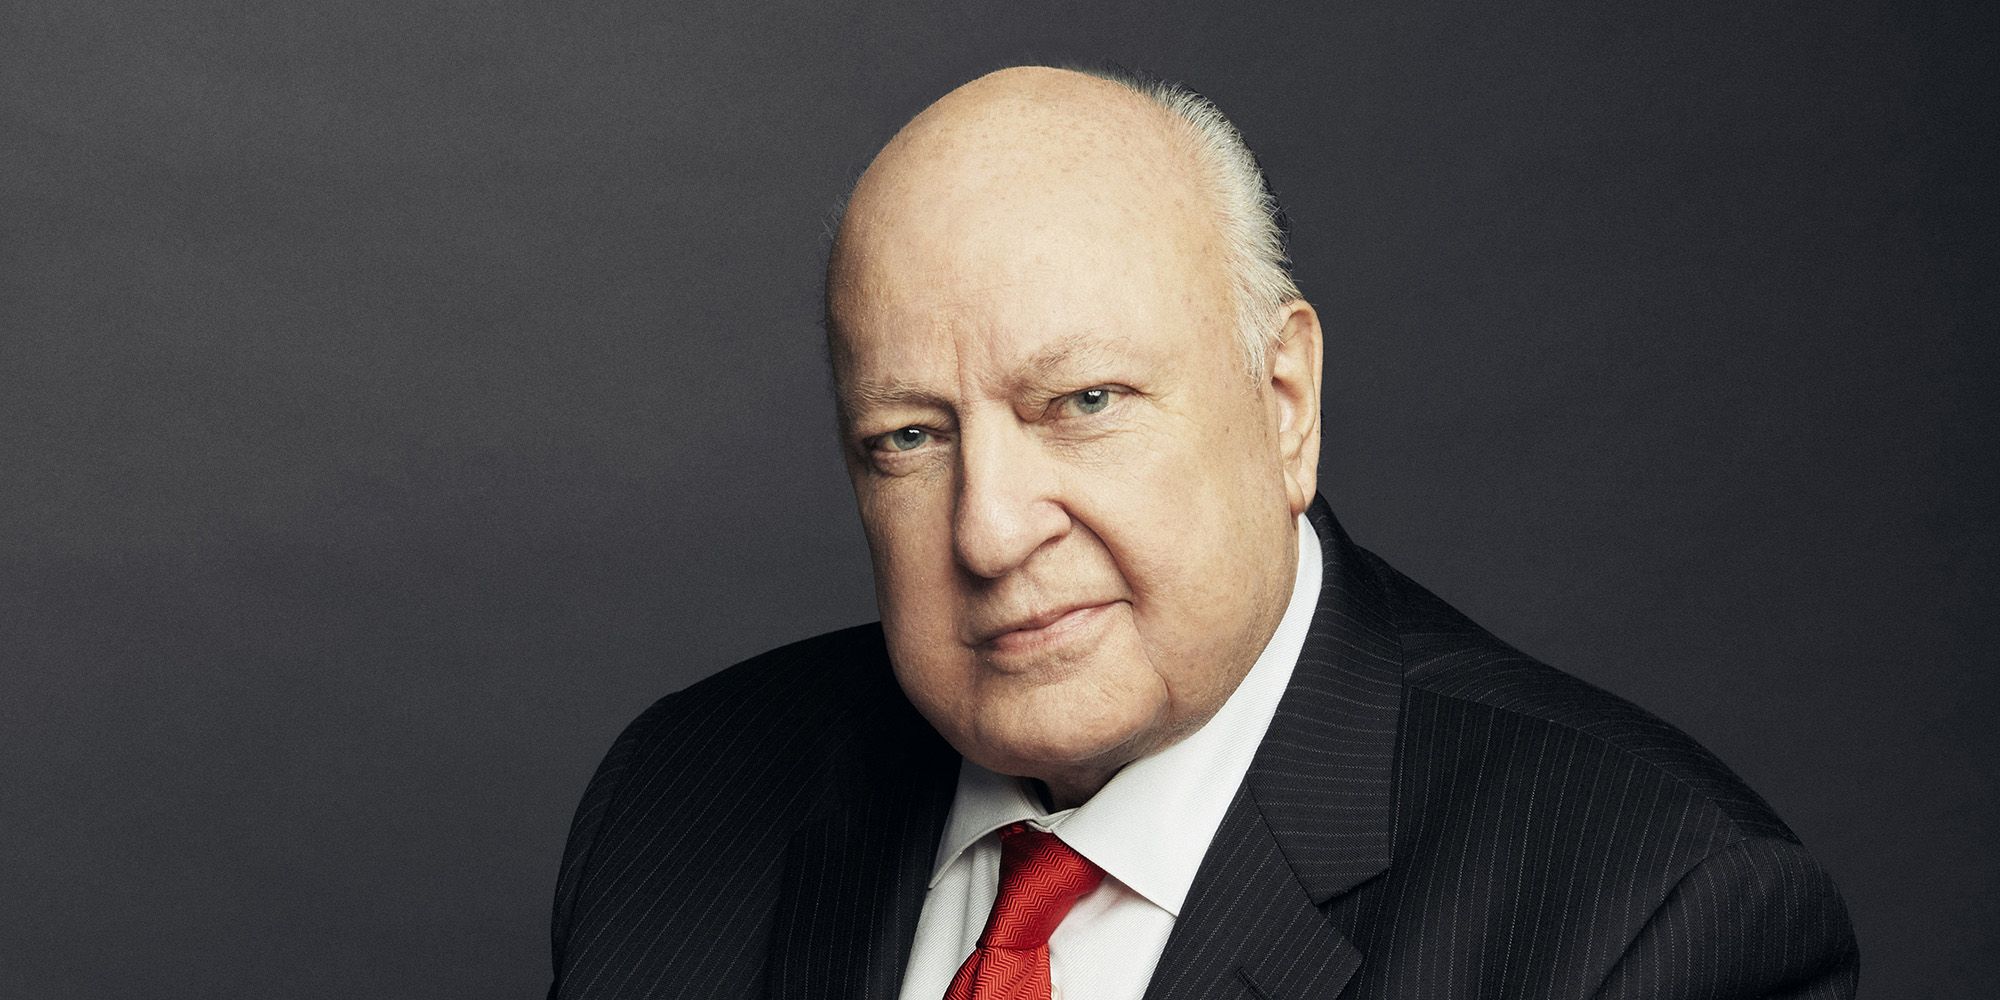 Roger Ailes Net Worth